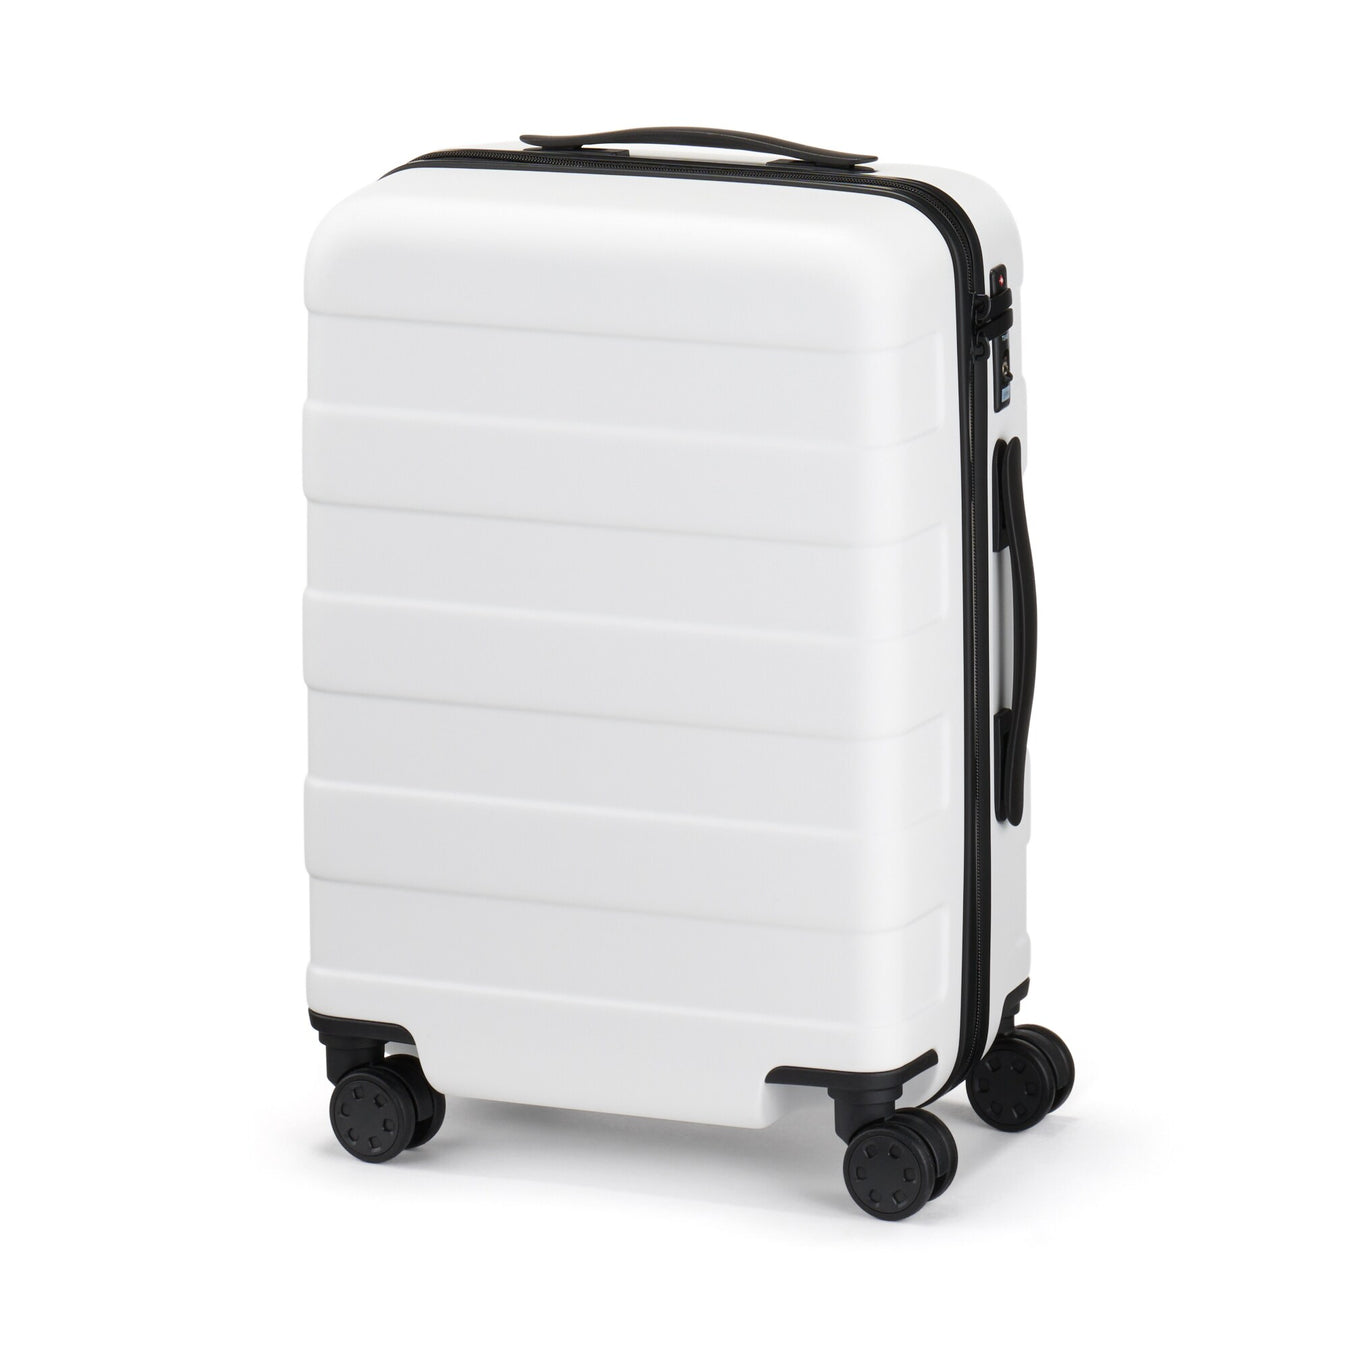 Carry-On Suitcases